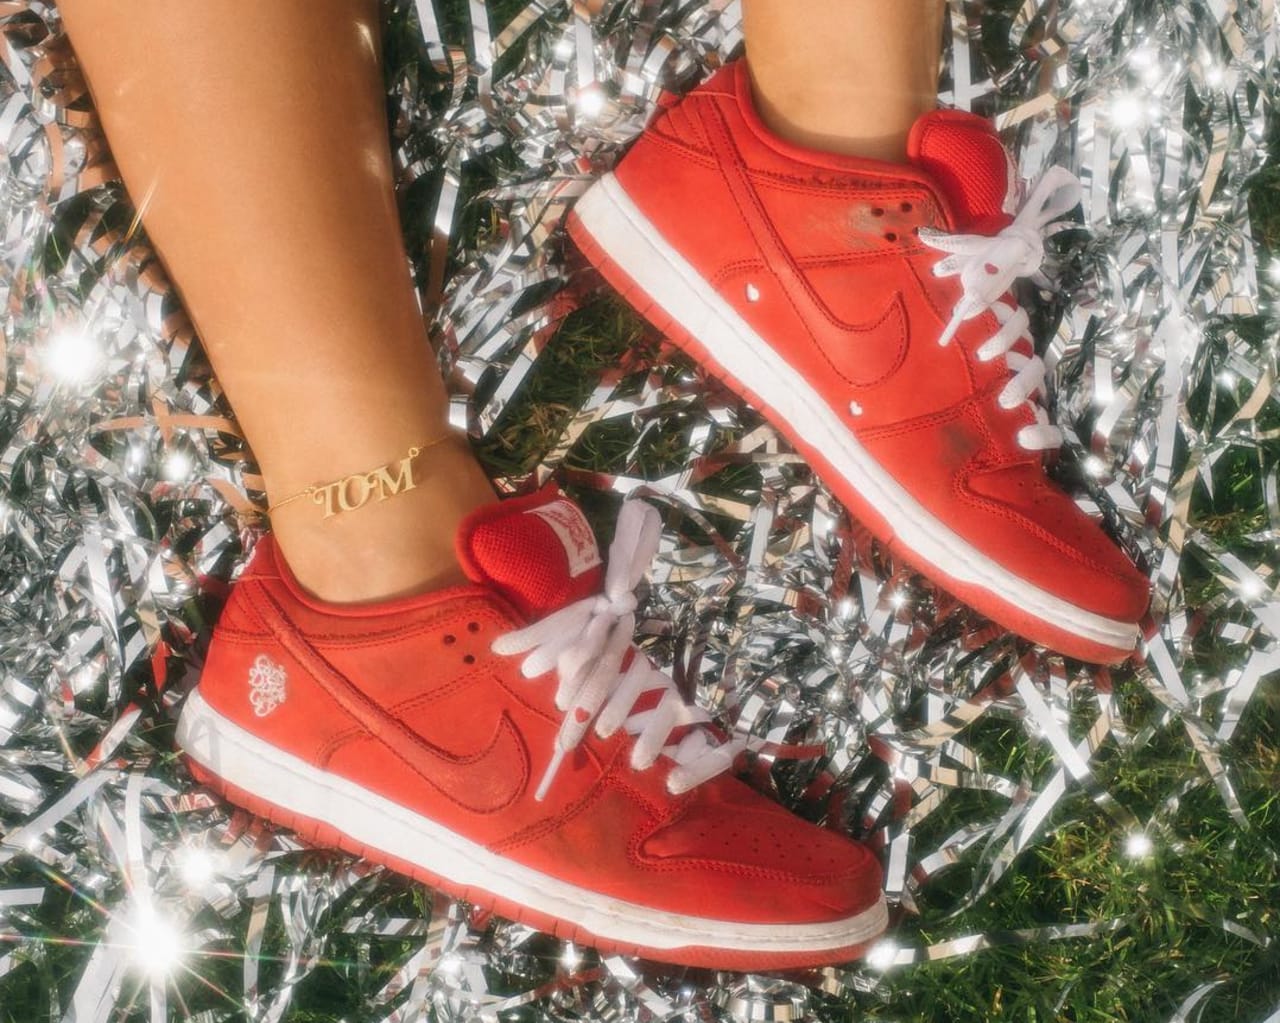 Verdy Teases Another Girls Don't Cry x Nike SB Dunk Low | Sole 